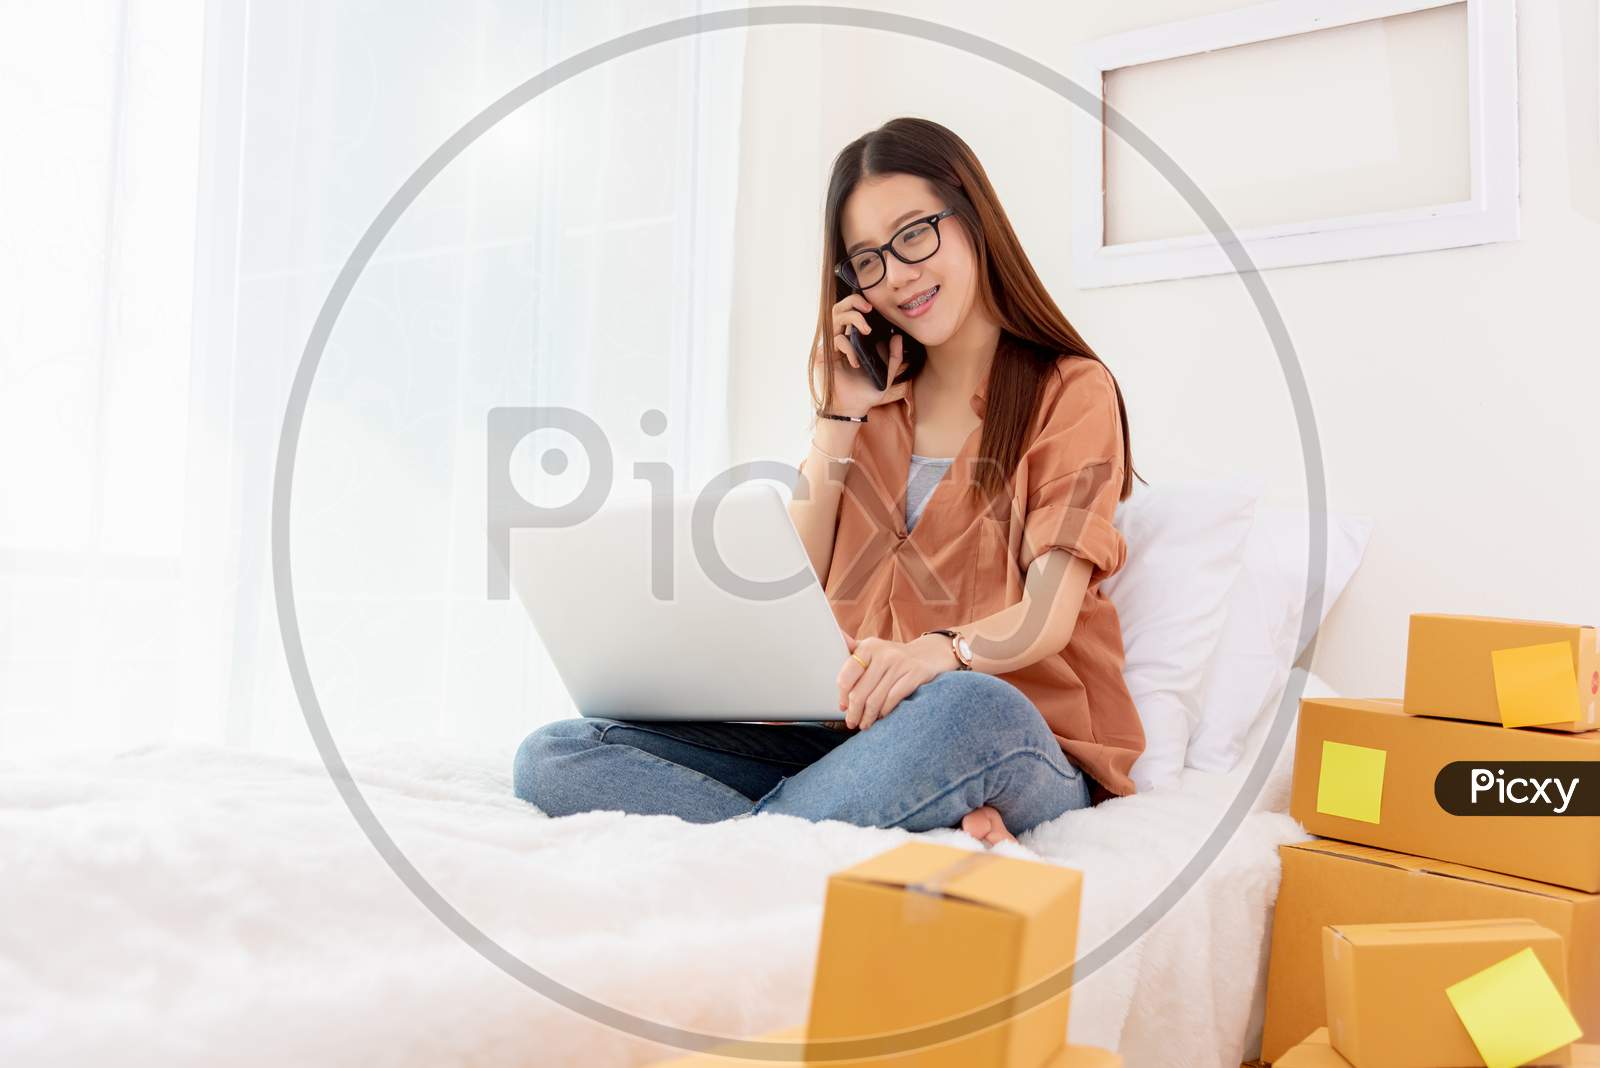 Beauty Asian Woman Using Laptop And Calling Phone On Bed. Business And Technology Concept. Delivery And Online Shopping Concept. Post And Service Theme. People Lifestyle Remote Work In Domestic House